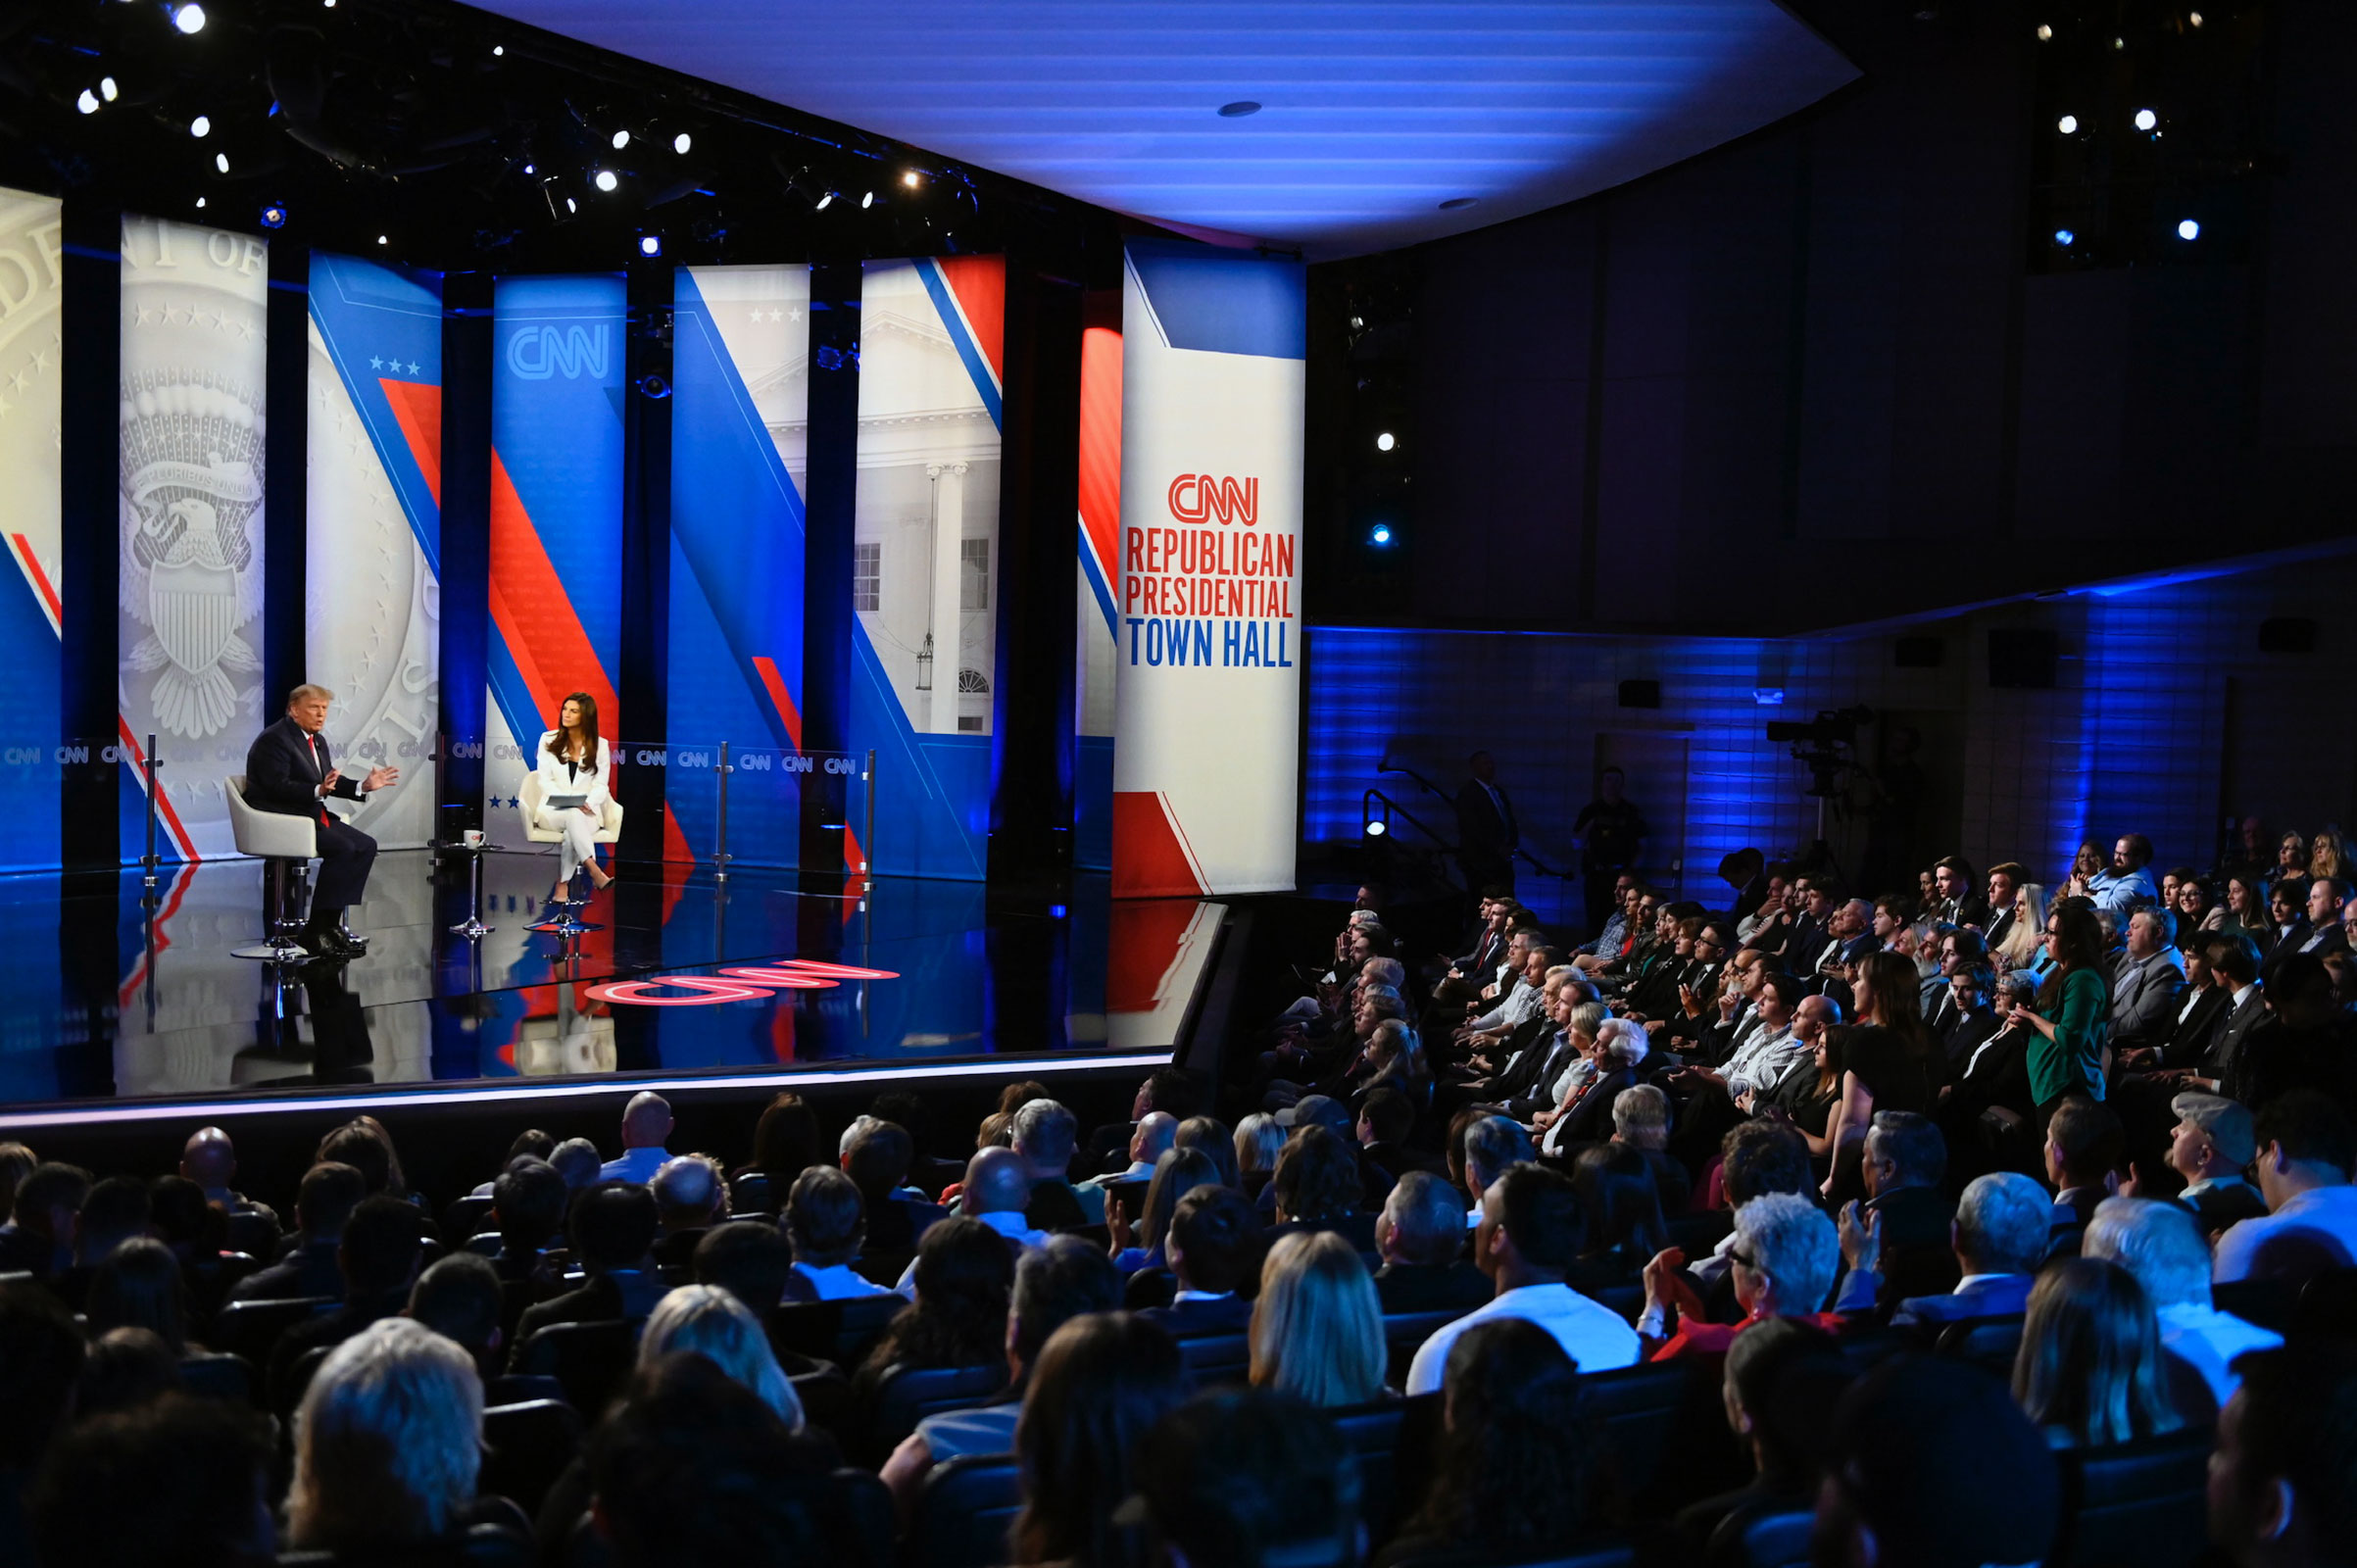 Audience members watch as President Donald Trump participates in a CNN Republican Town Hall moderated by CNN’s Kaitlan Collins at St. Anselm College in Manchester, New Hampshire, on Wednesday, May 10, 2023.